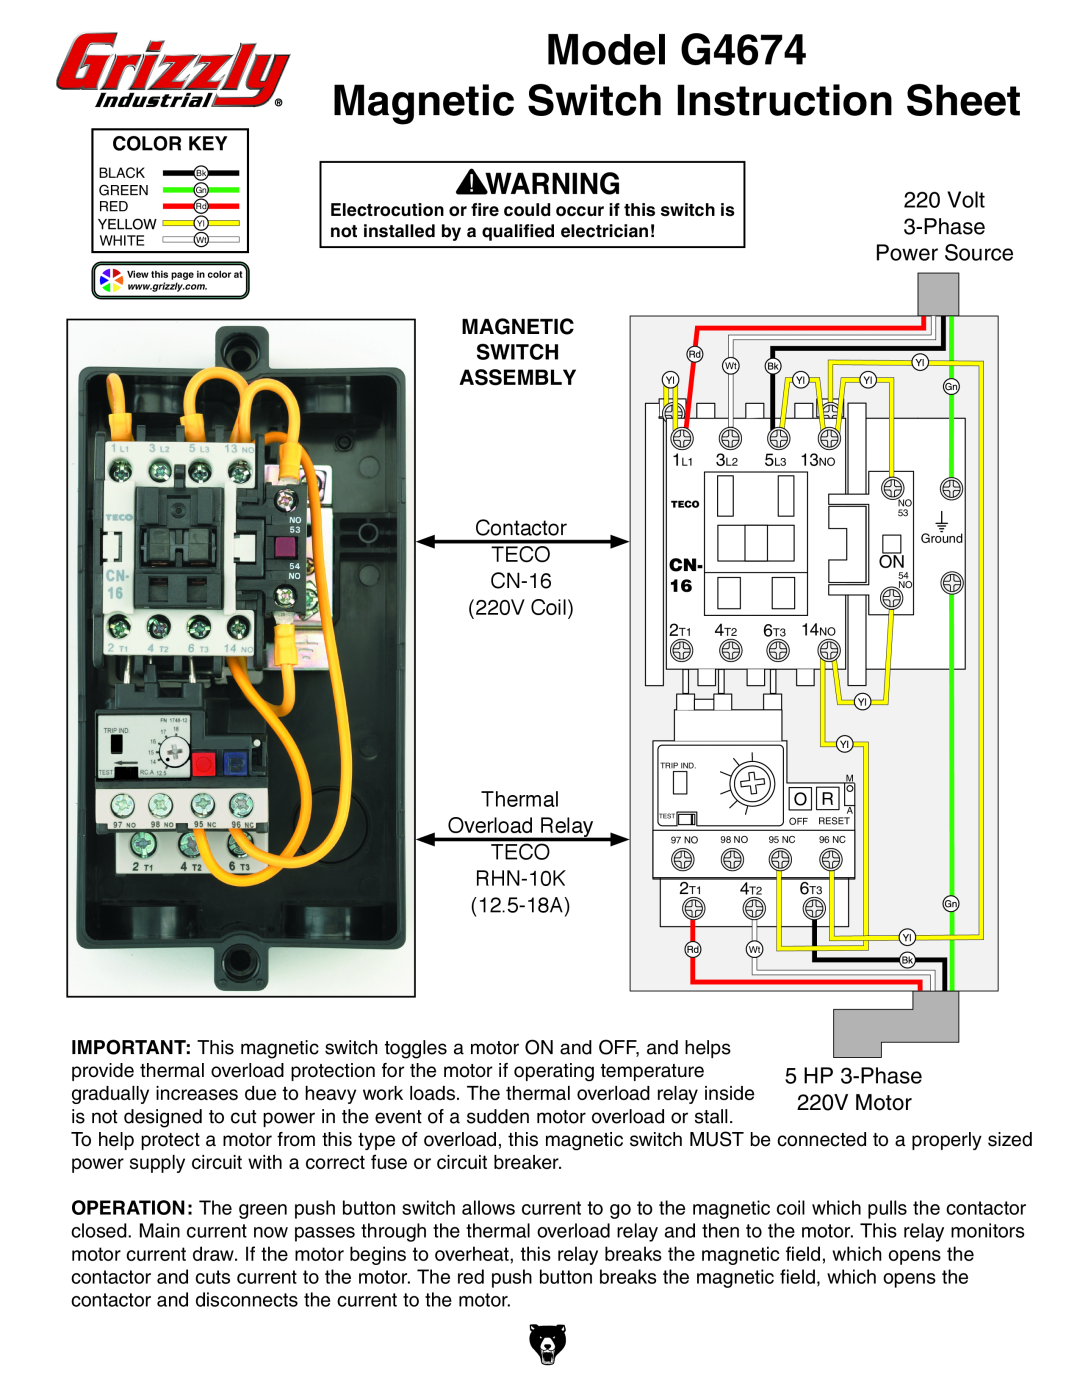 Grizzly instruction sheet Model G4674 Magnetic Switch Instruction Sheet, Magnetic Switch Assembly 